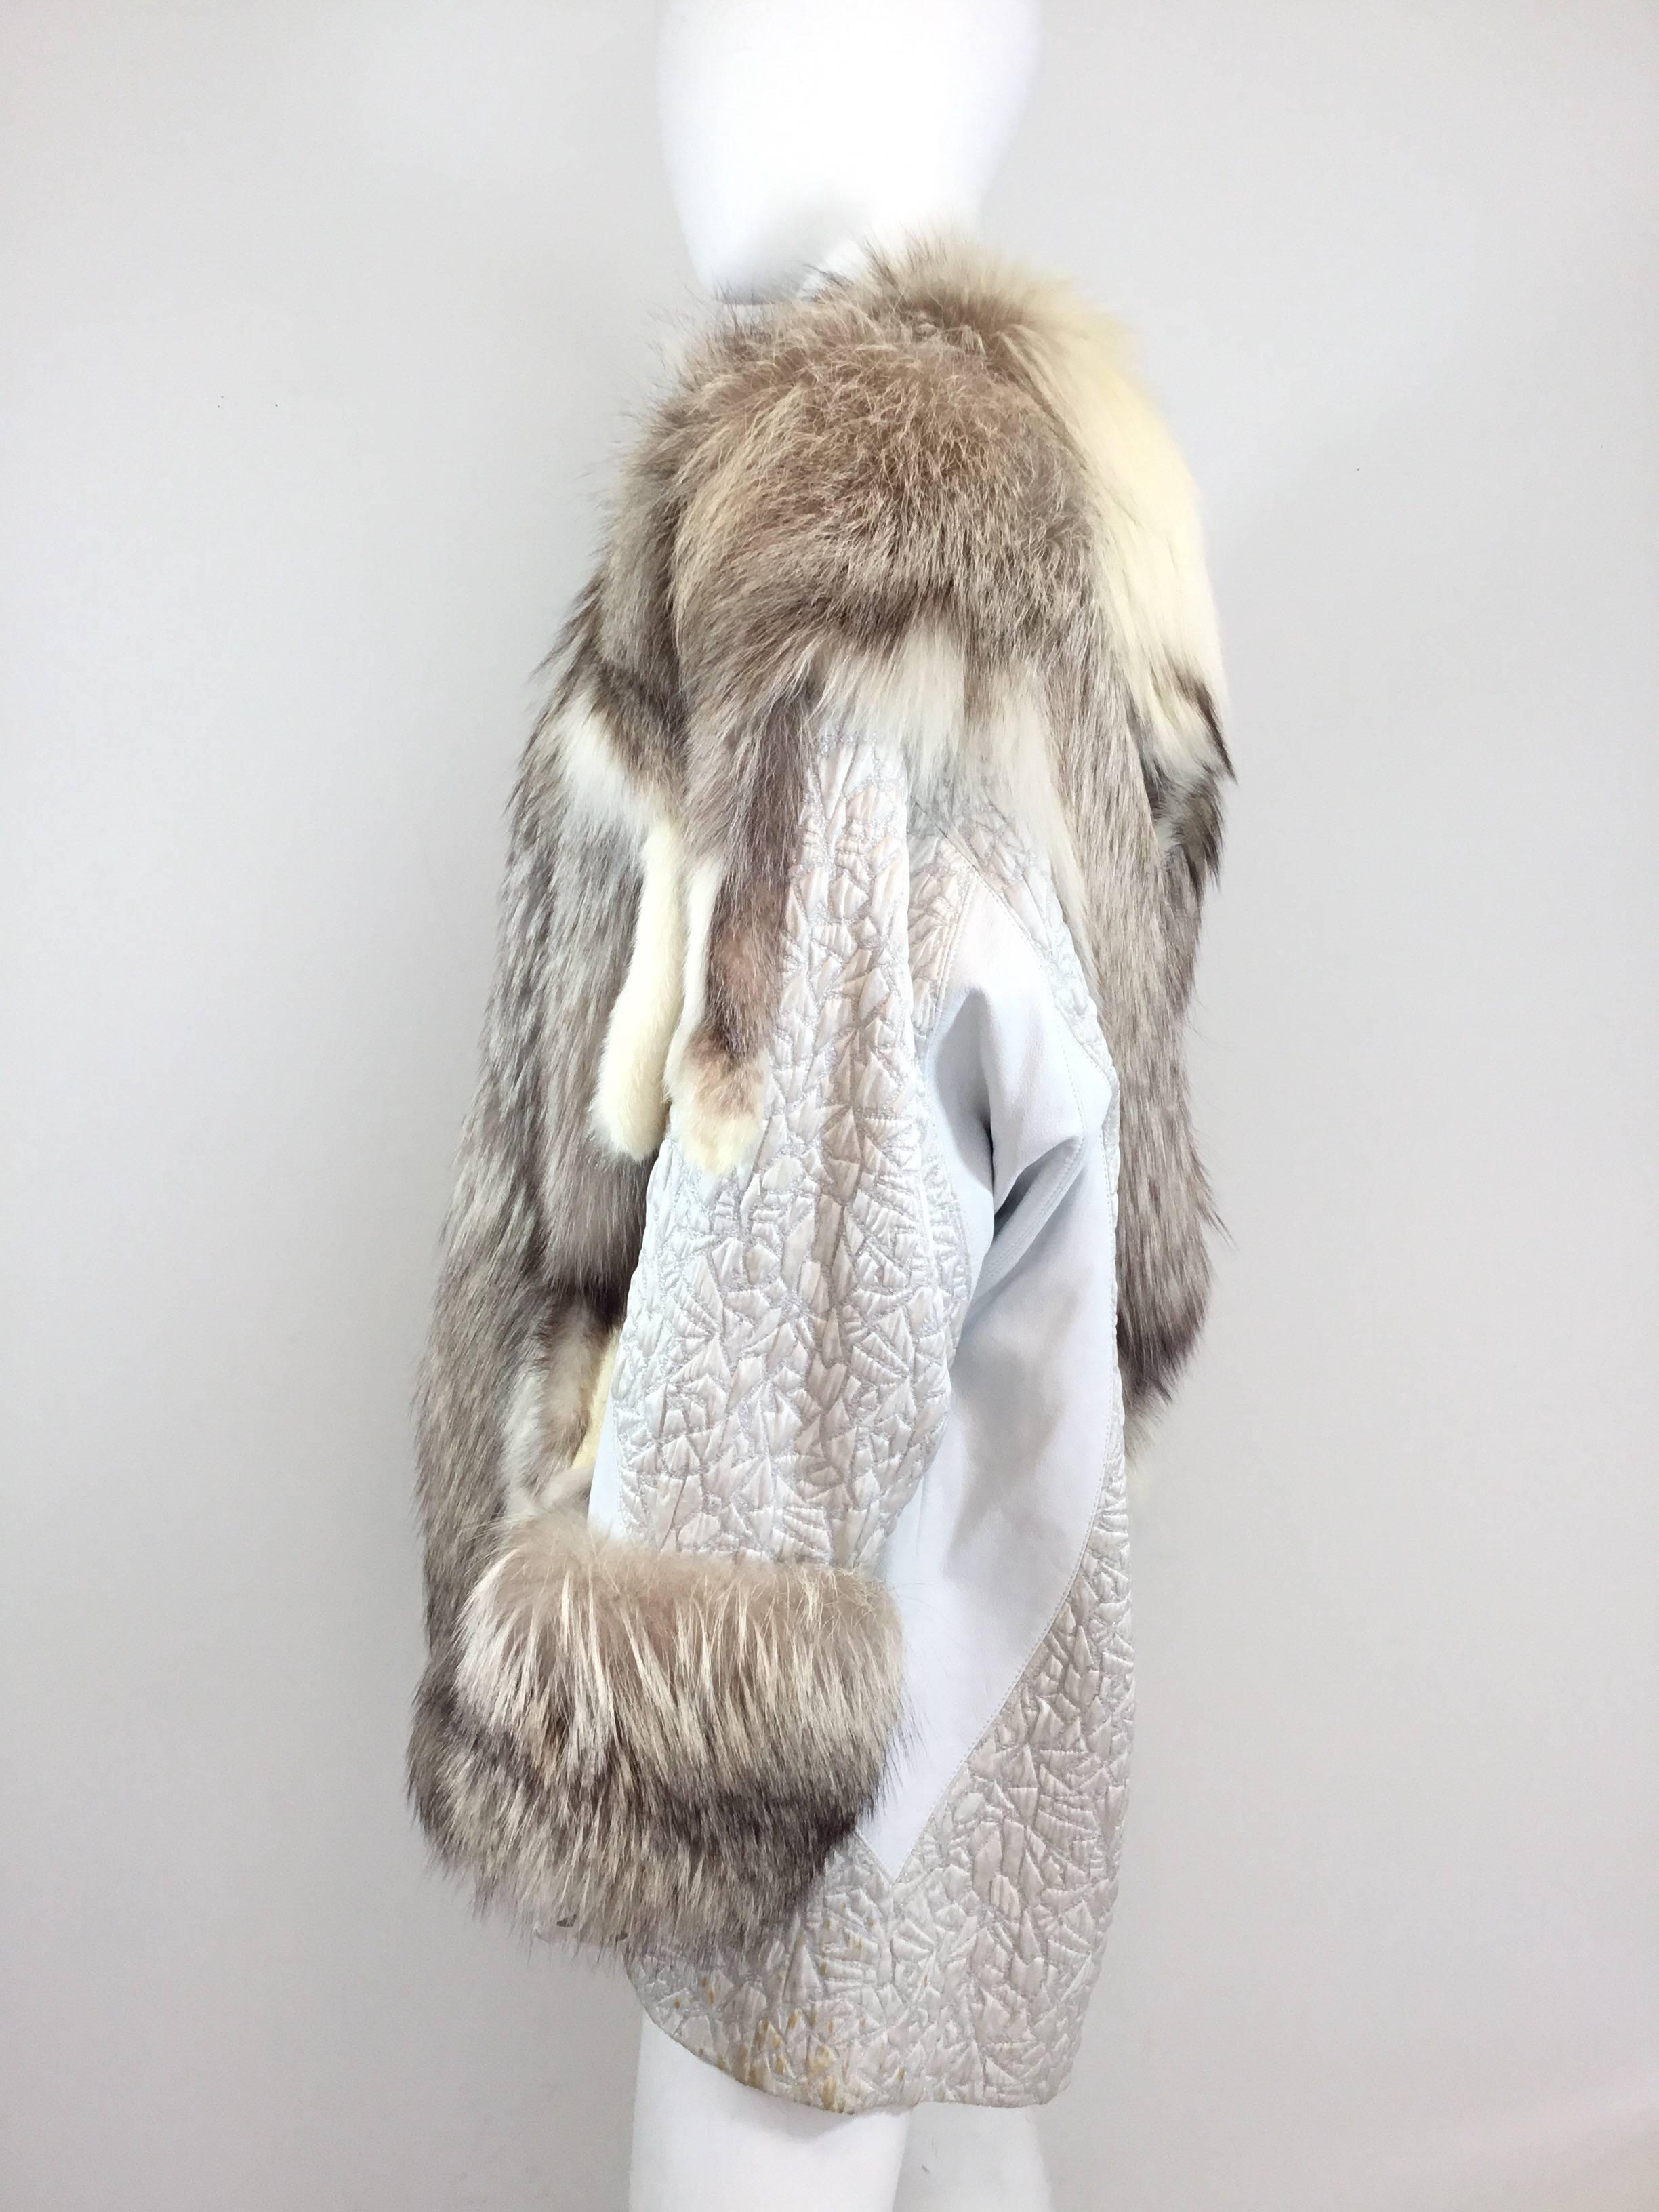 Fur jacket features fox fur throughout with leather and embroidered detail. Jacket has pockets at the waist and is fully lined. Jacket has some spotting due to age/handling. See photos.

Bust 44’’, sleeves 20’’, length 36’’